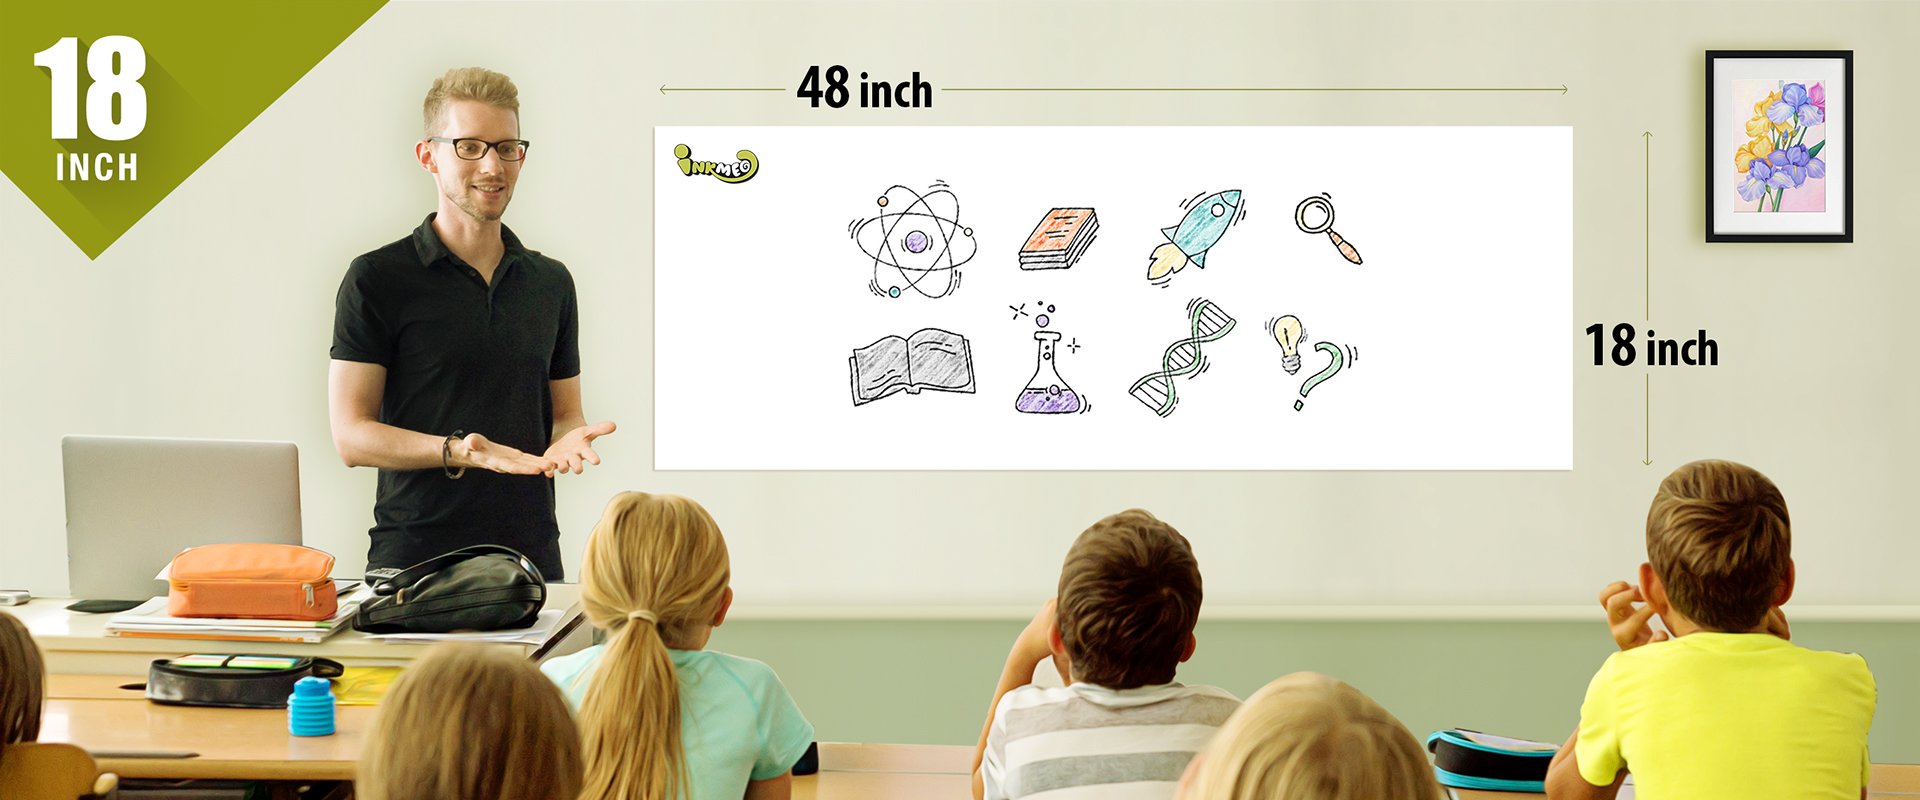 The image depicts a classroom with a teacher and students. The teacher is instructing the students using a white sheet with science pictures.